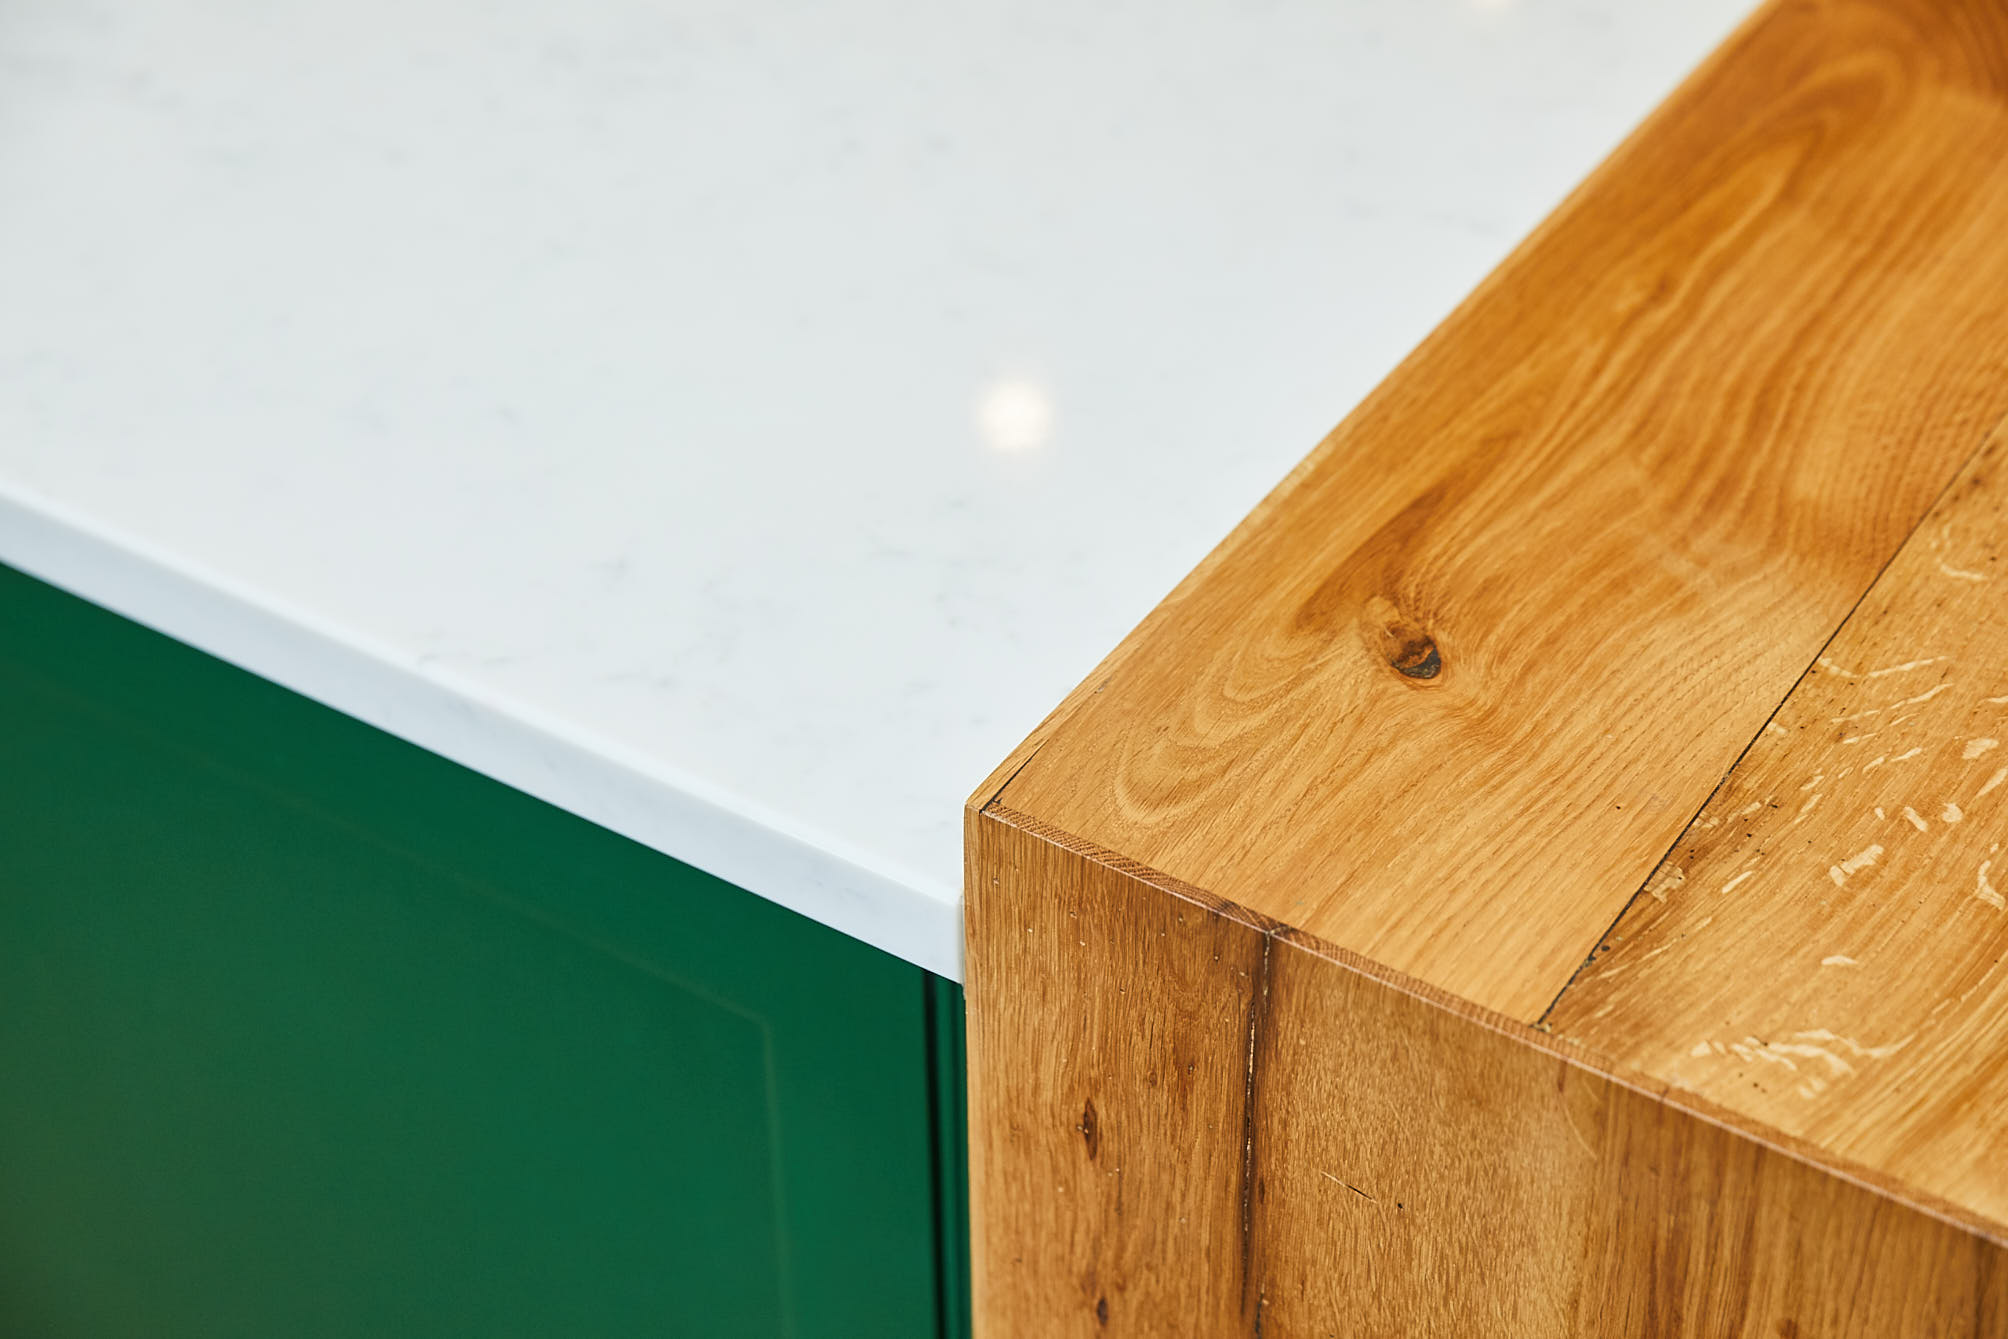 Oak breakfast bar against whitre quartz worktop and green painted kitchen cabinets